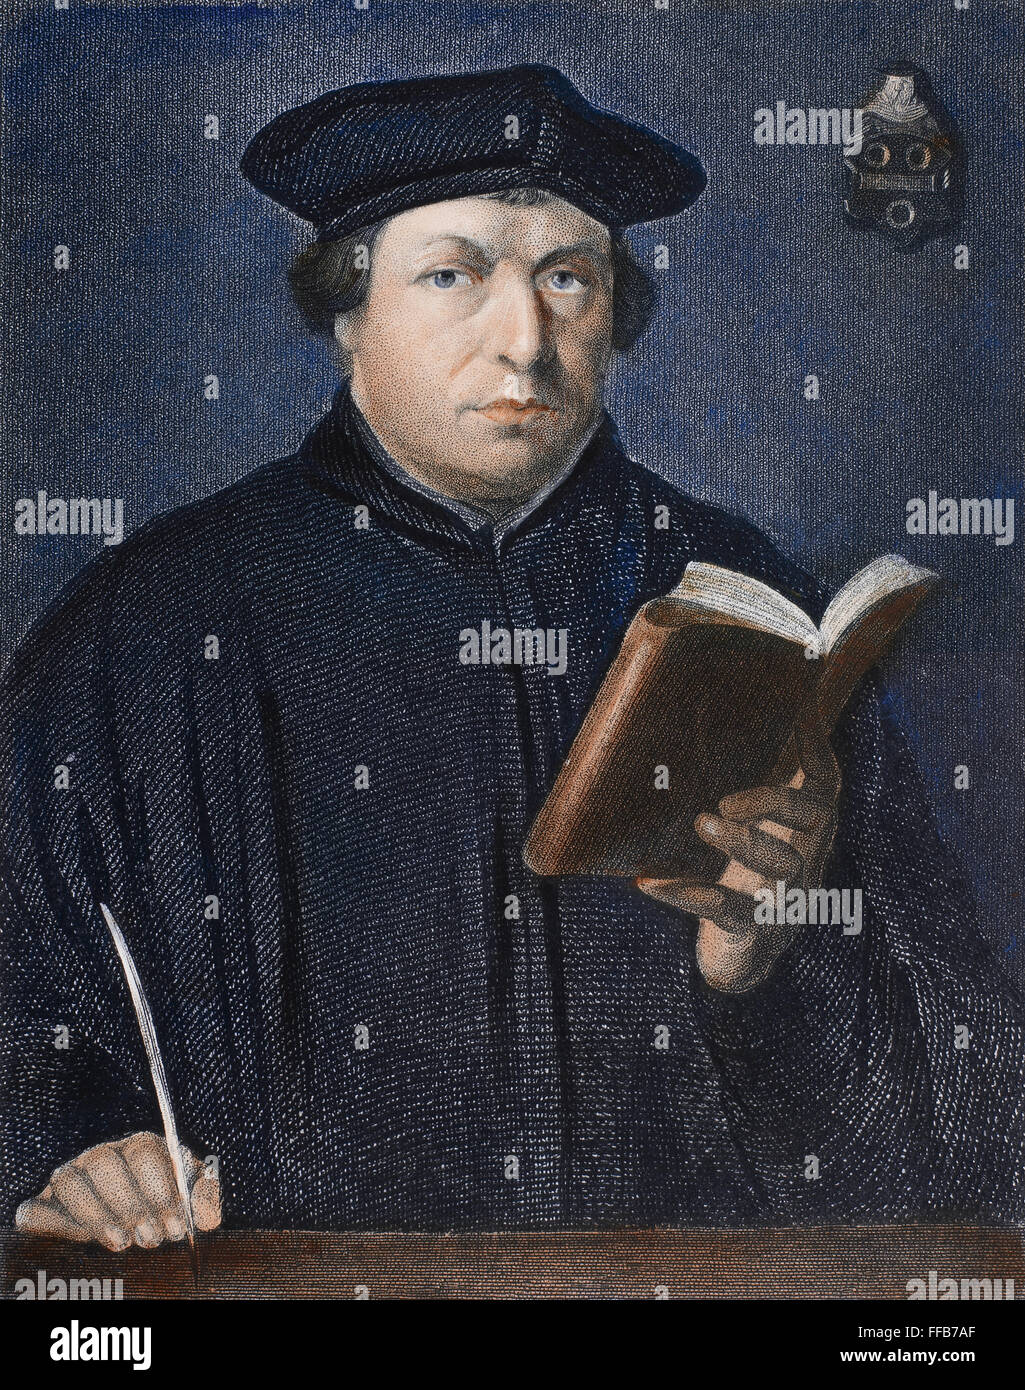 MARTIN LUTHER (1483-1546). /nGerman religious reformer. Line and stipple engraving by Charles Wagstaff, 19th century. Stock Photo